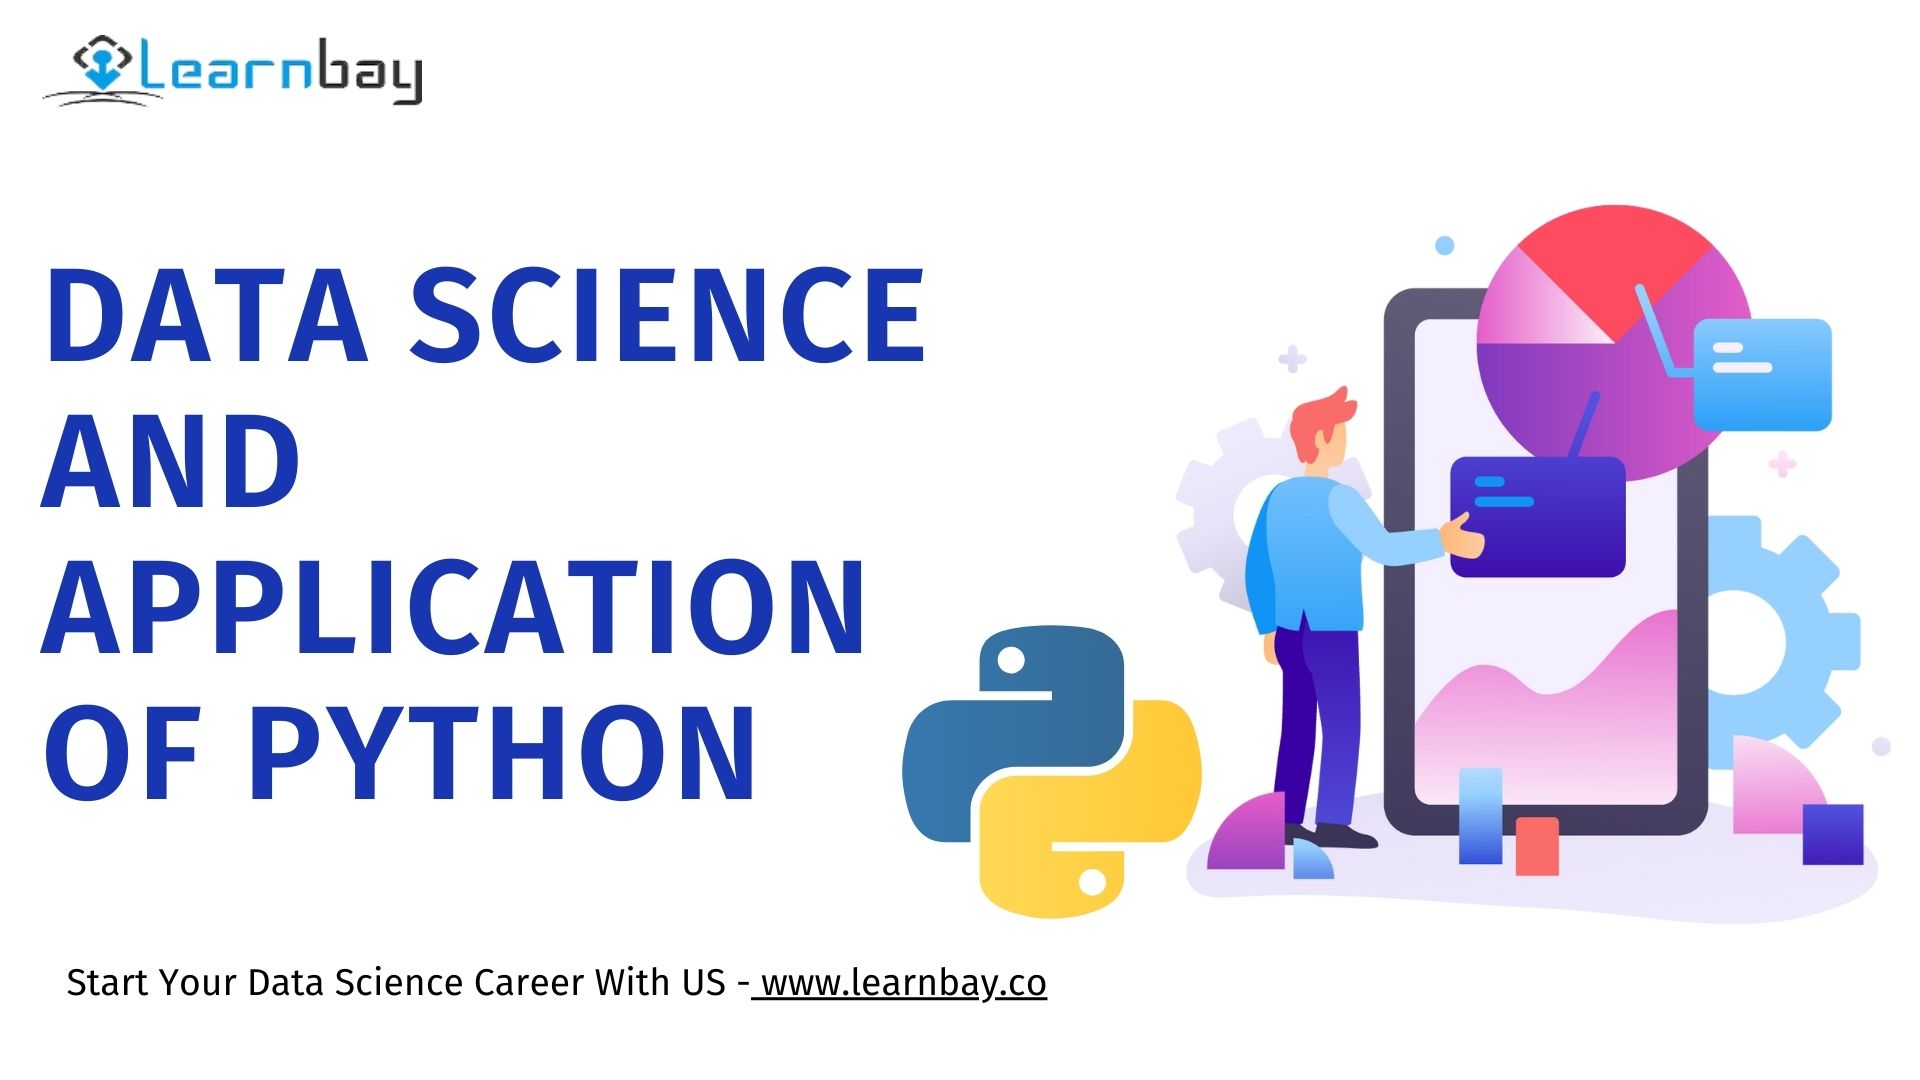 Data Science and Application of Python